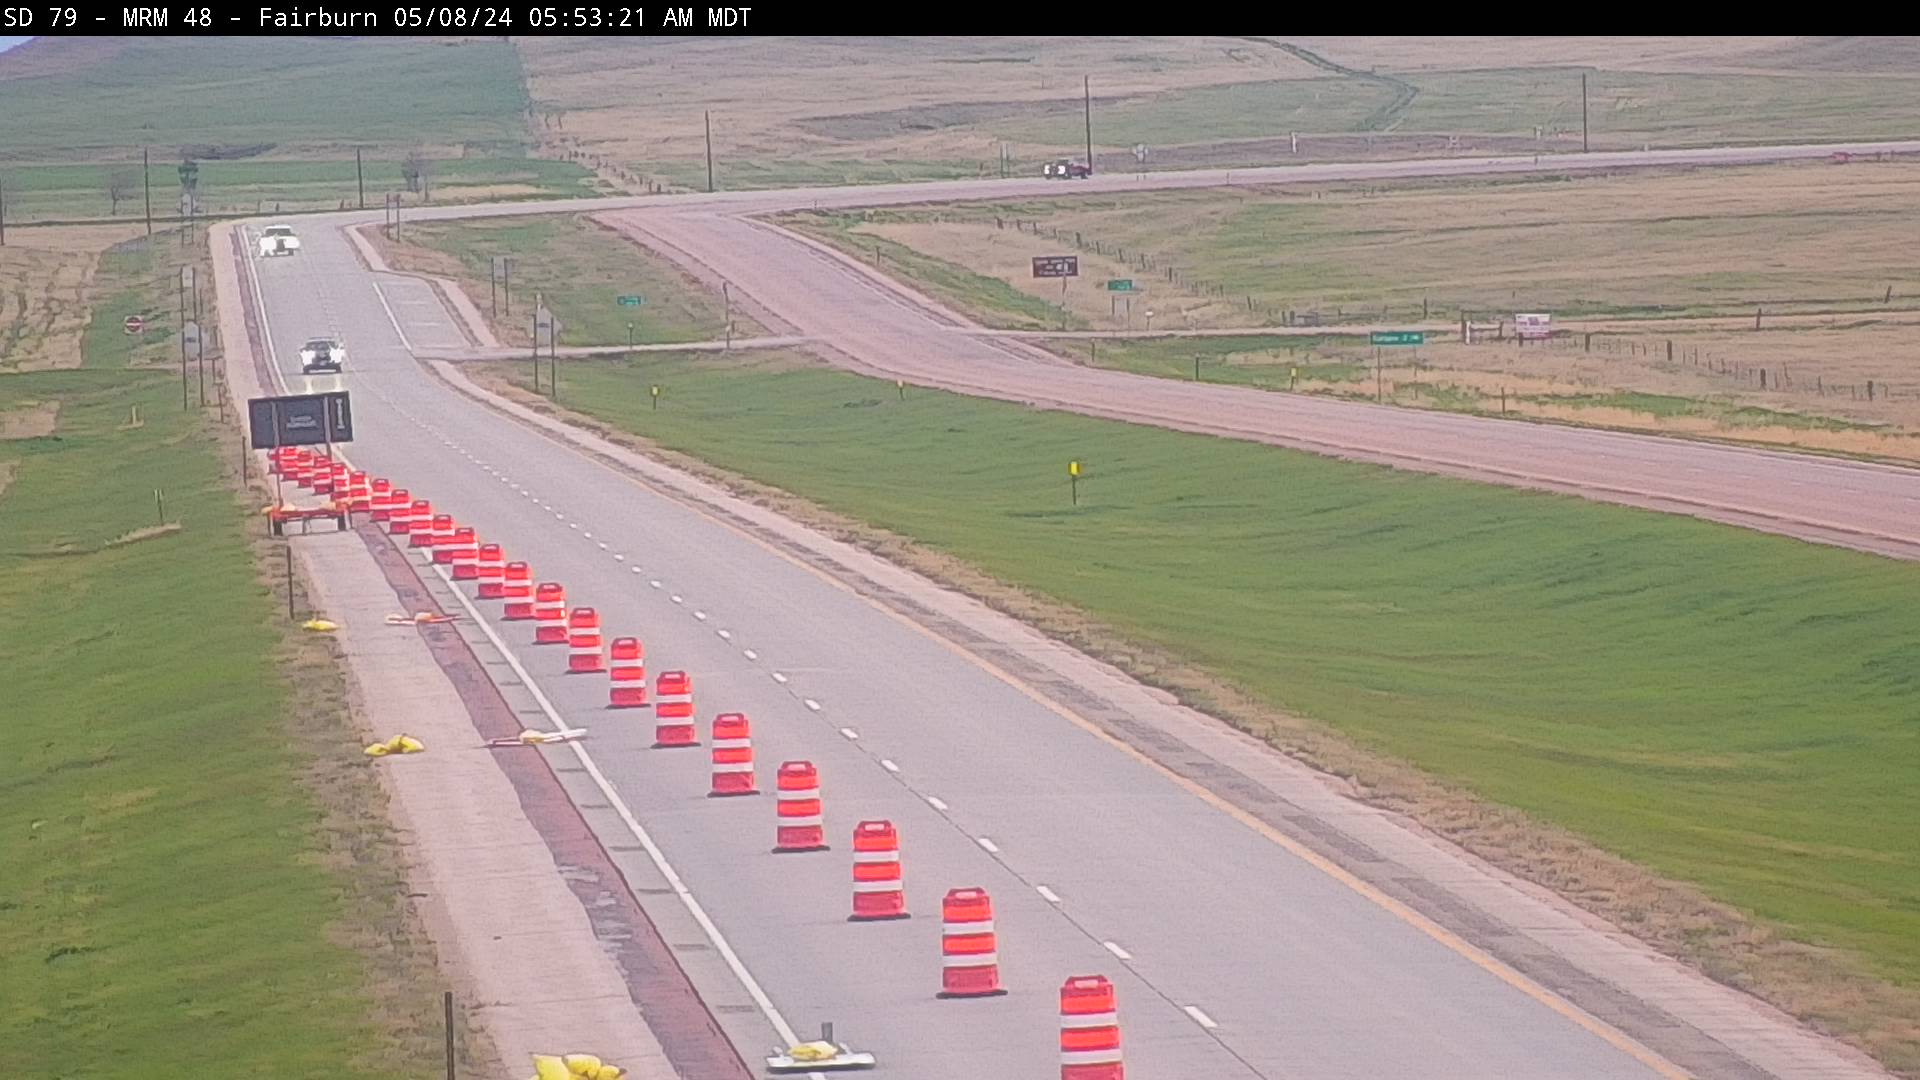 Traffic Cam along SD-79 - North Player